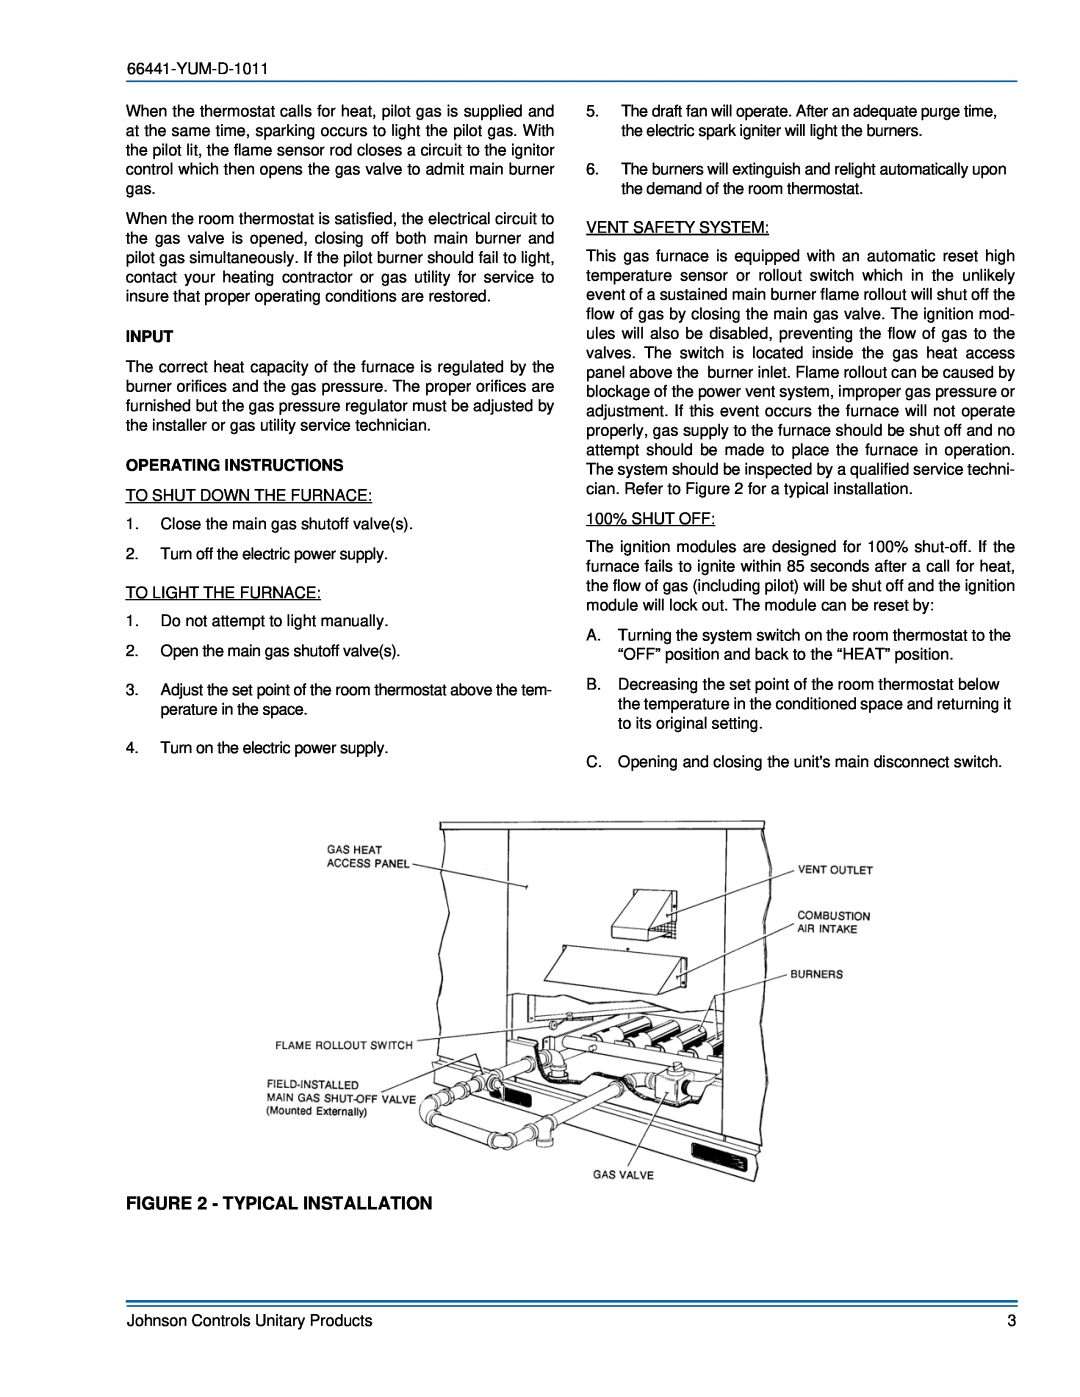 York 66441-YUM-D-1011 manual Typical Installation, Input, Operating Instructions 